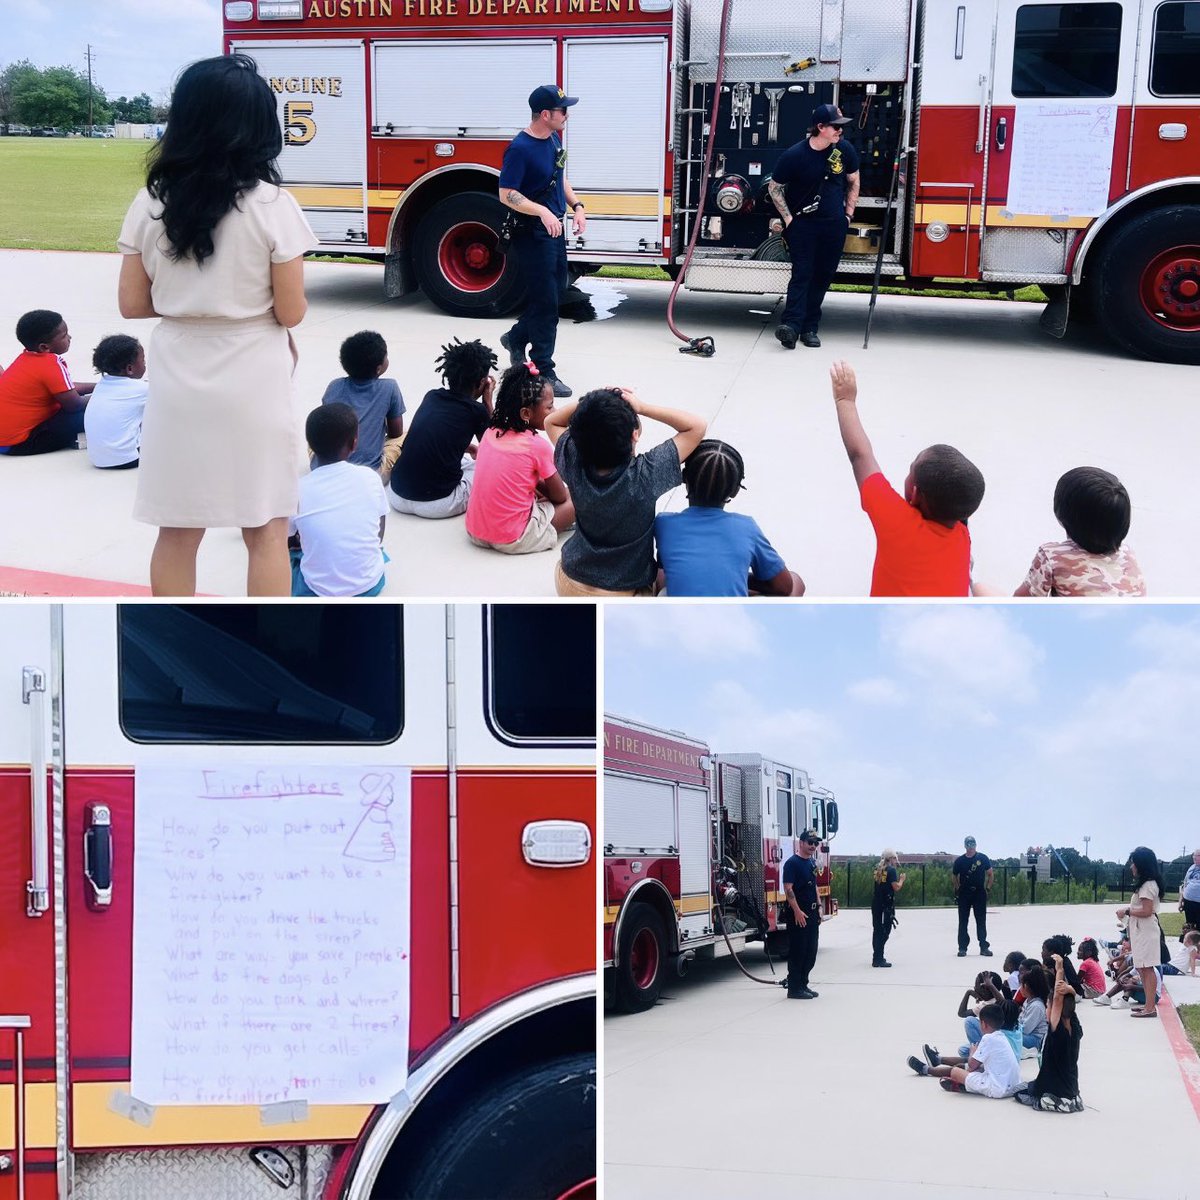 🚒 Kindergarten had a special visit from the Austin Fire Department today! 

🚒 Exciting learning experiences like this make our days brighter! 

#AISDProud 
#KidsDeserveIt